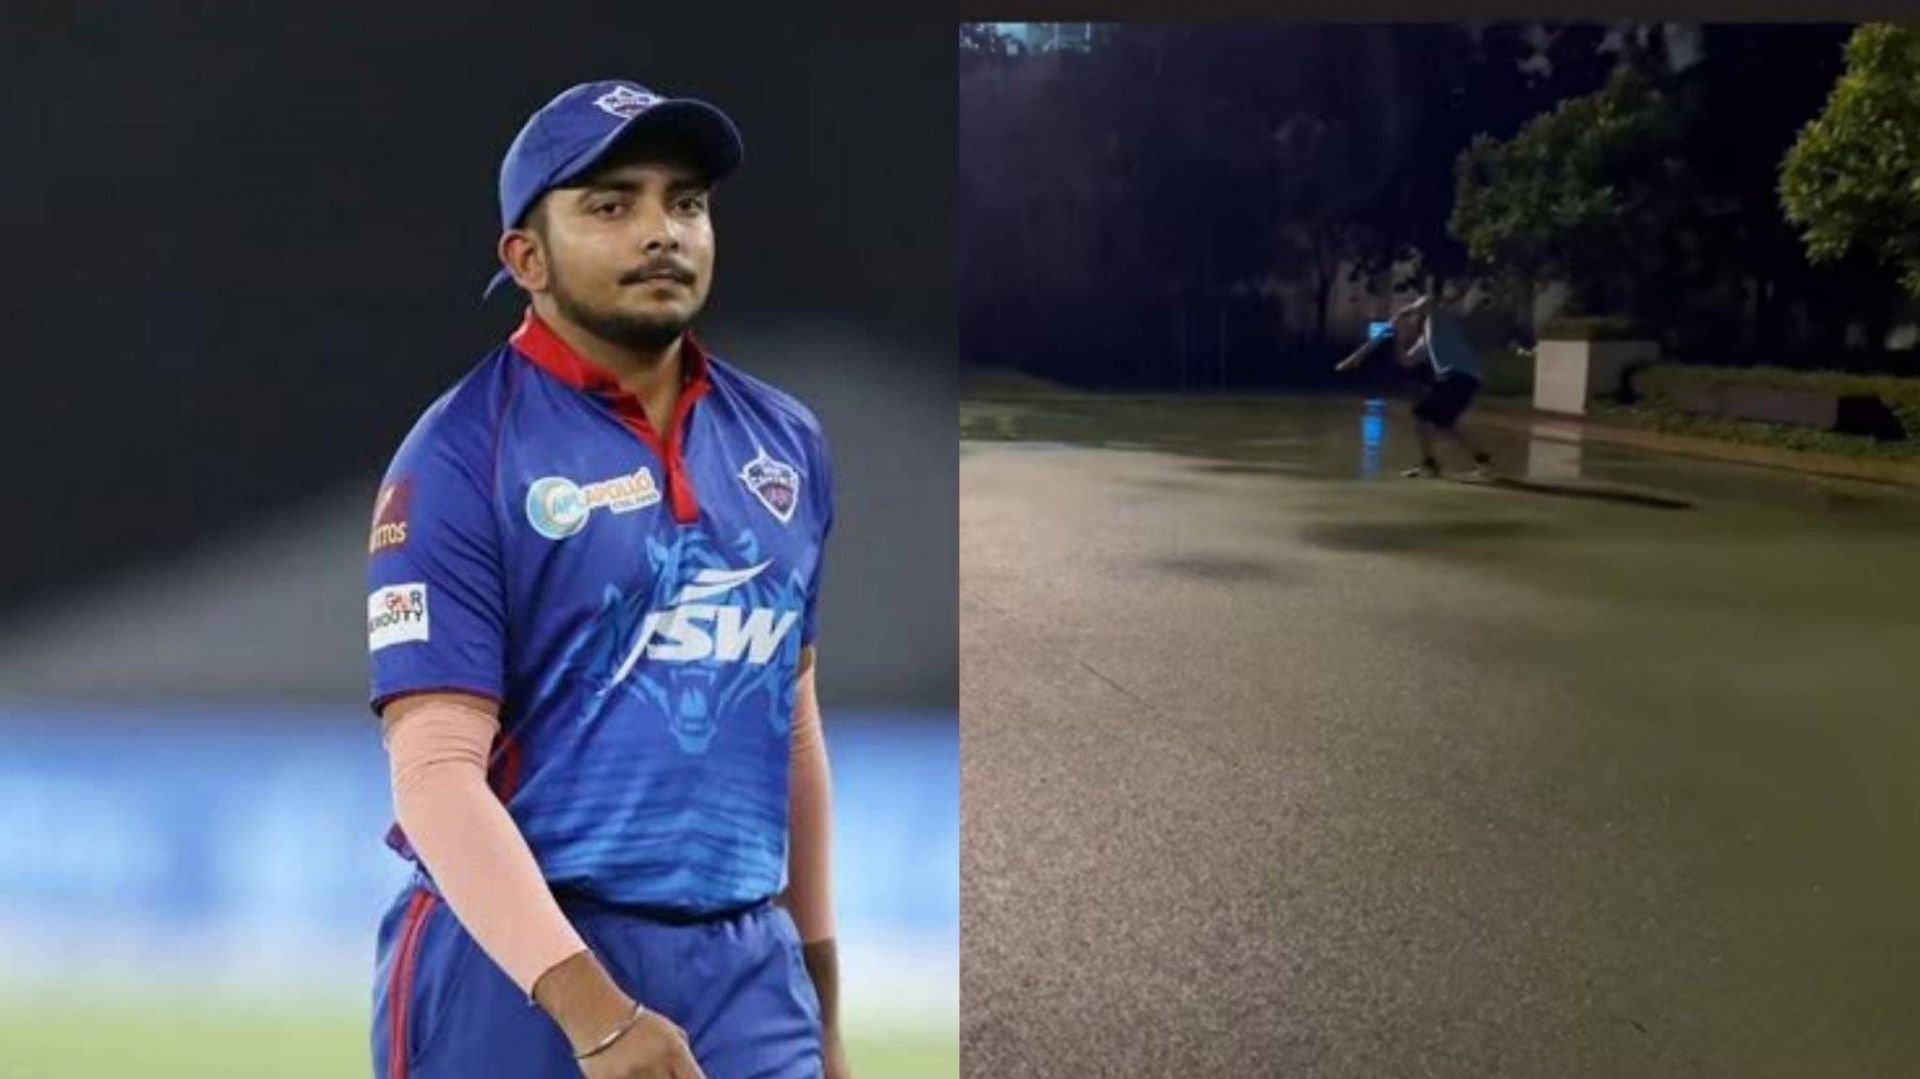 Prithvi Shaw did not receive a place in the Indian T20I team